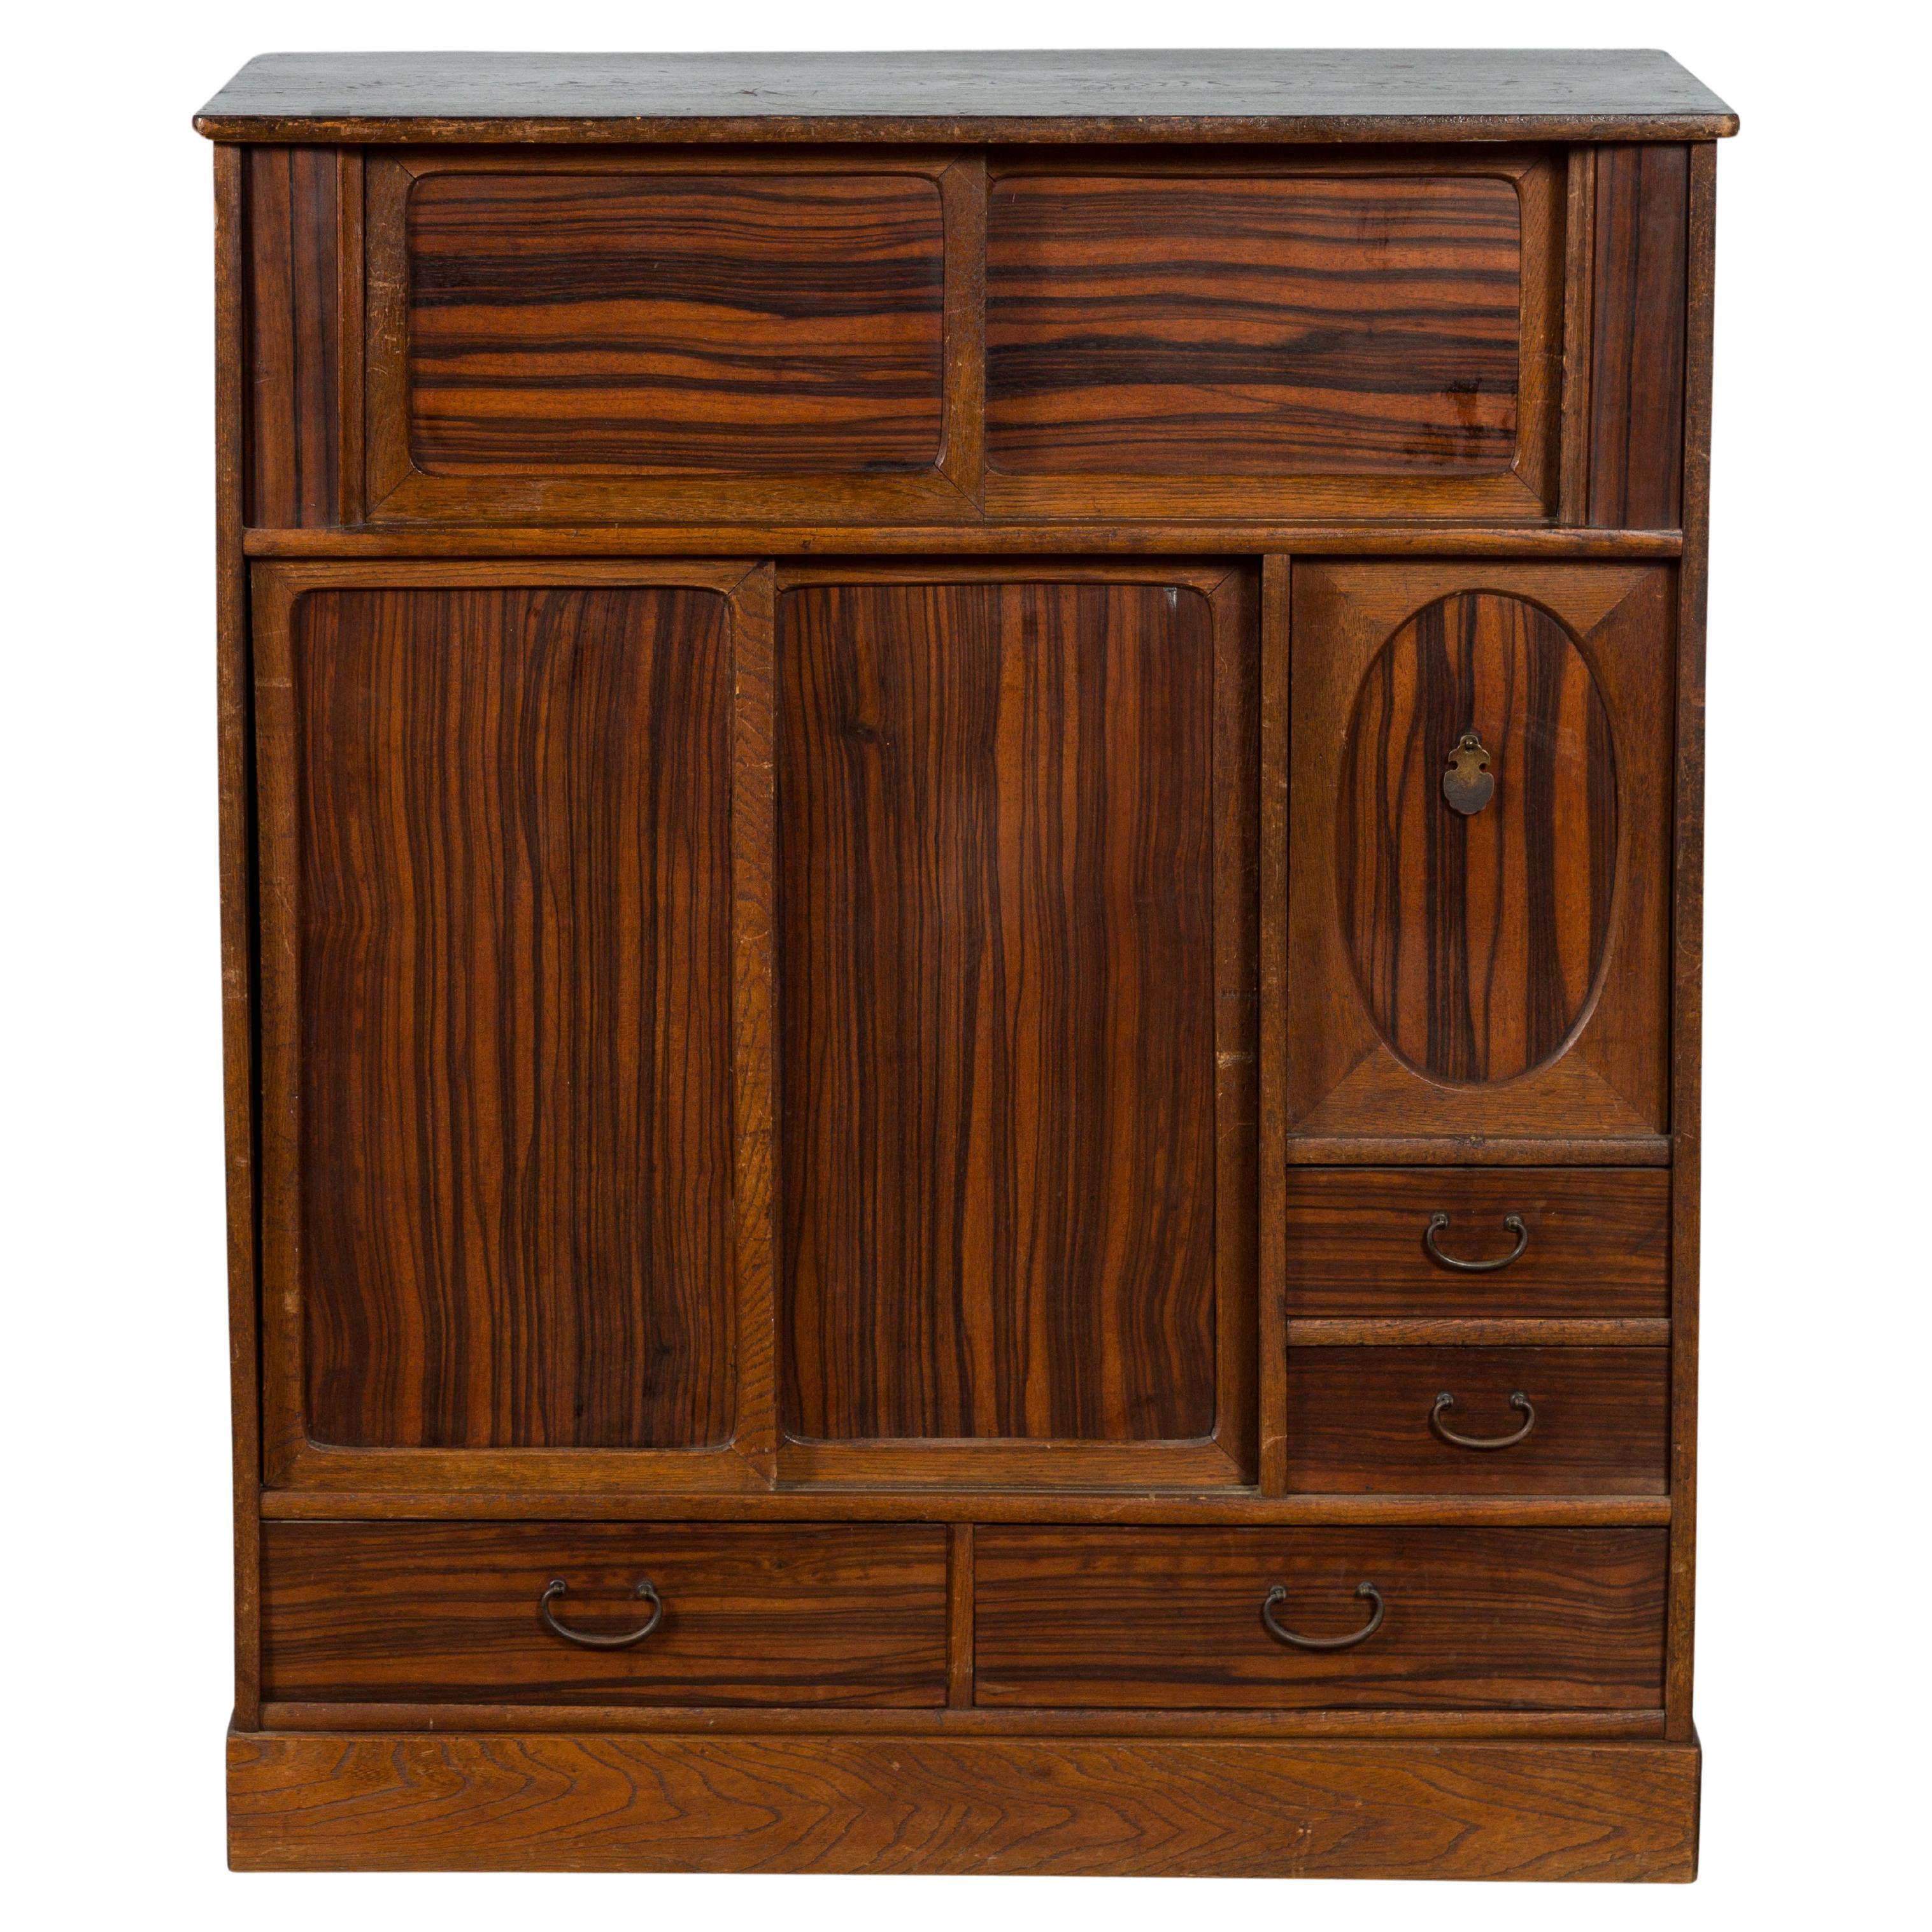 Japanese 19th Century Zebra Wood Cabinet with Sliding Doors, Panel and Drawers For Sale